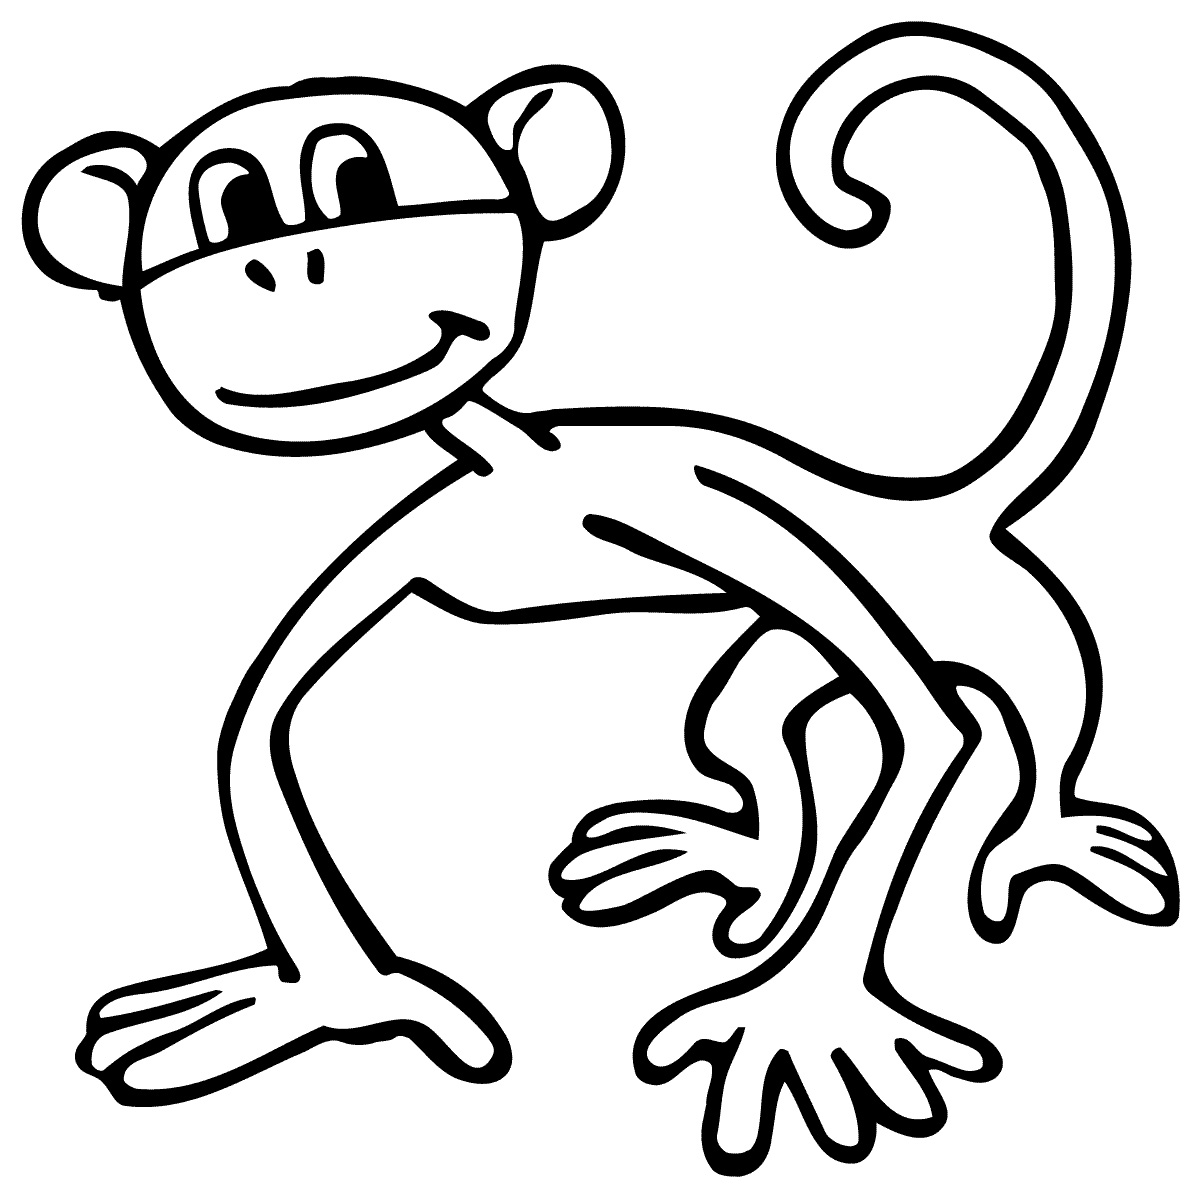 How to Draw a Monkey  Step by Step Drawing Guide  Easy Peasy and Fun